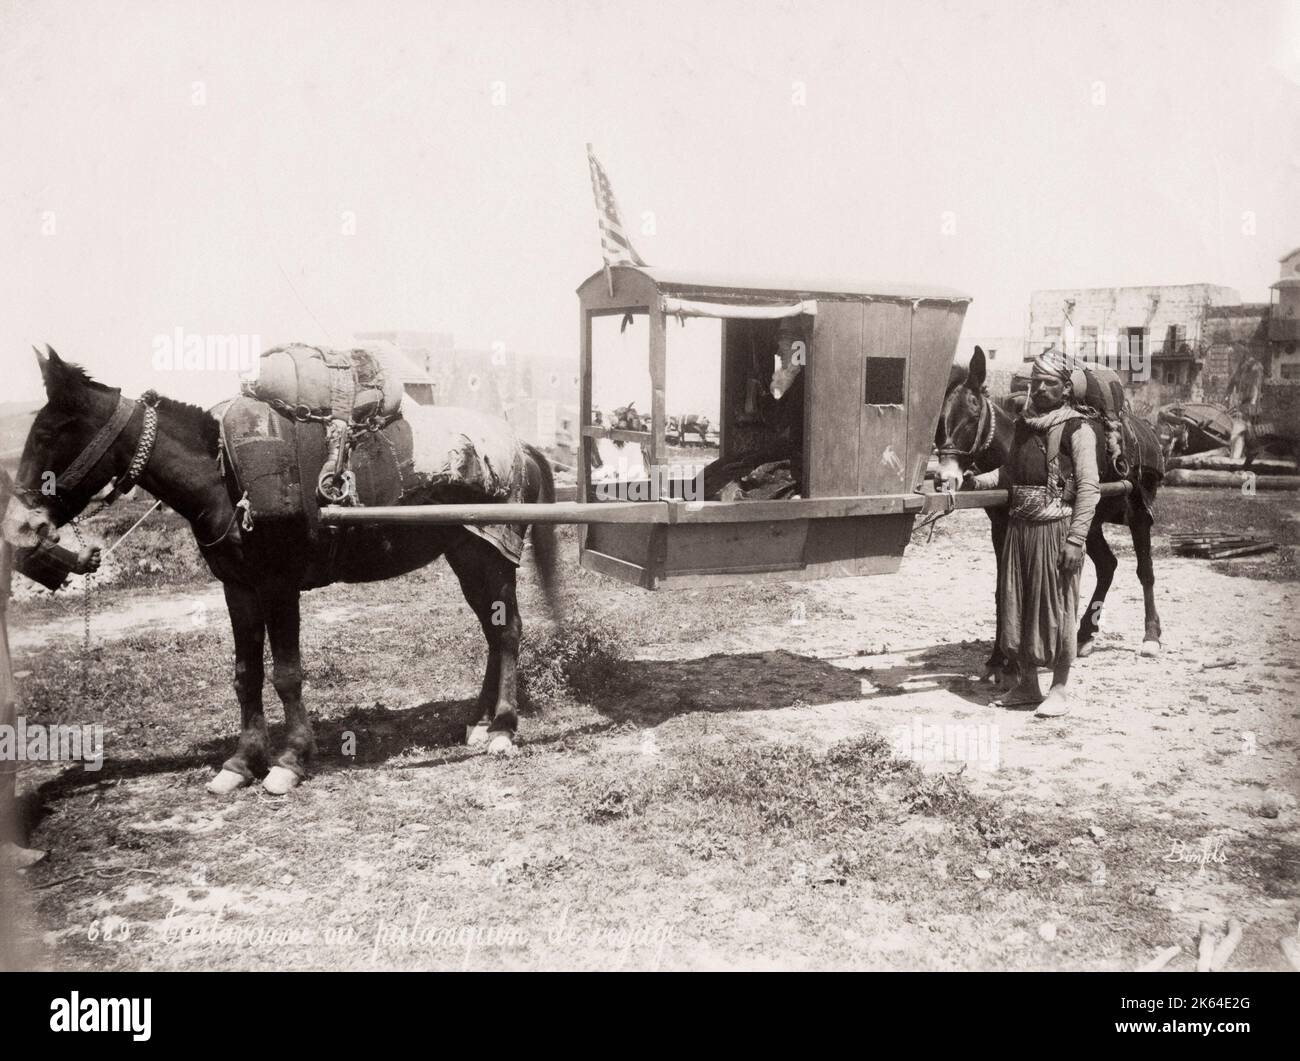 Vintage 19th century photograph: mule drawn palanquin, sedan chair, carrying chair, Egypt. Stock Photo